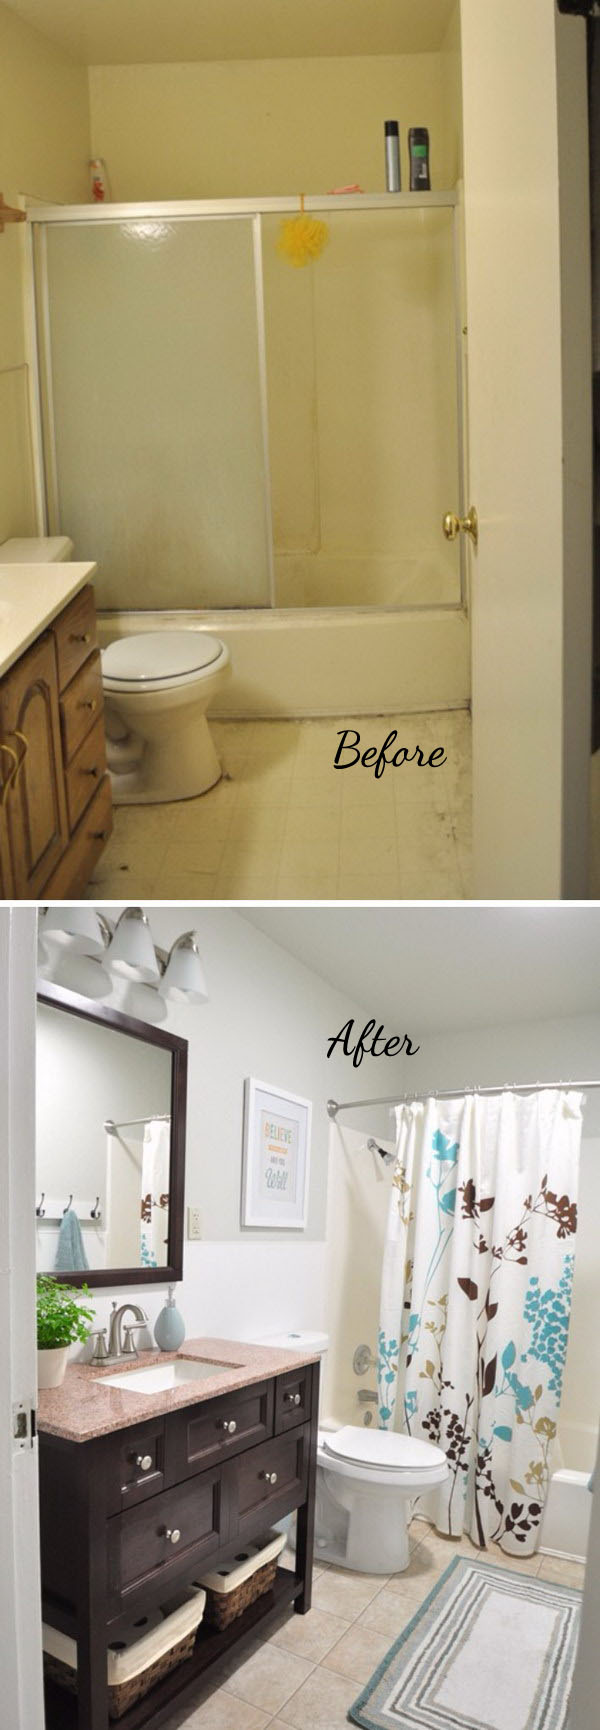 3-4-bathroom-remodel-before-and-after